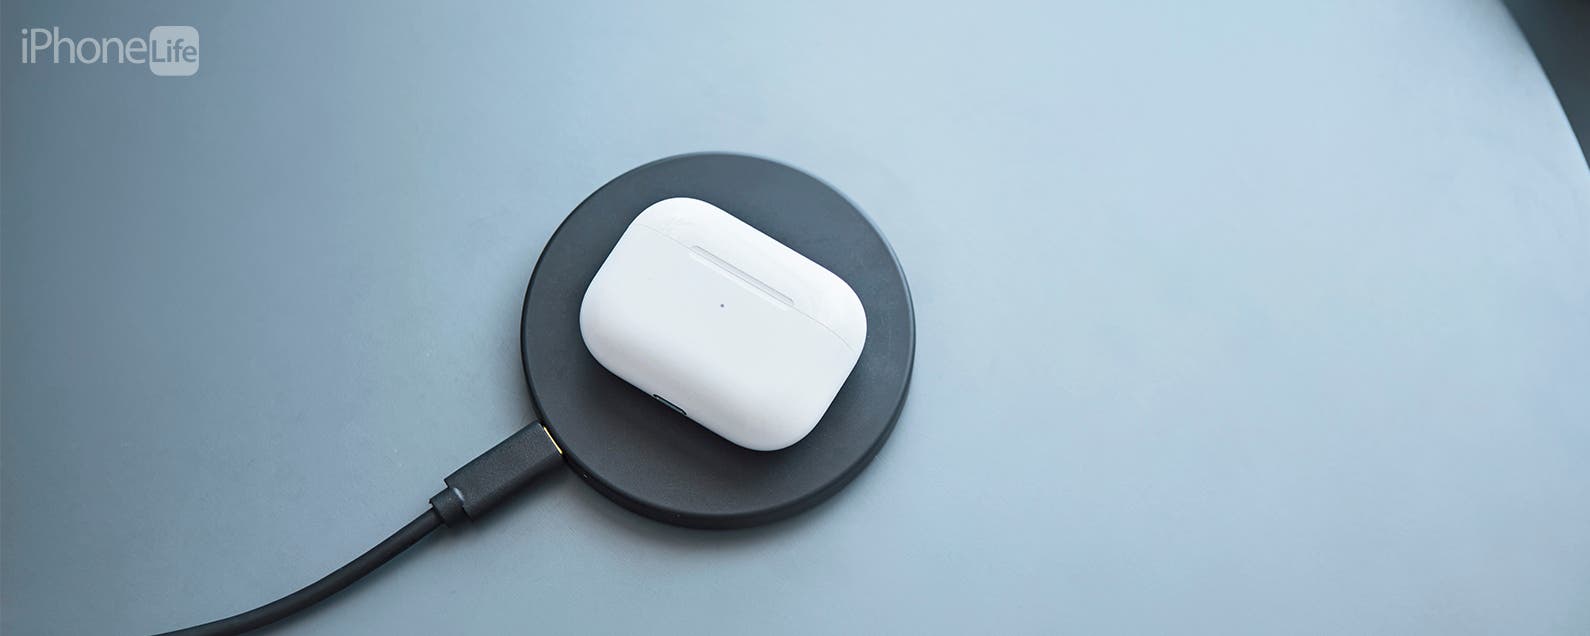 How to charge your AirPods Max and learn about battery life - Apple Support